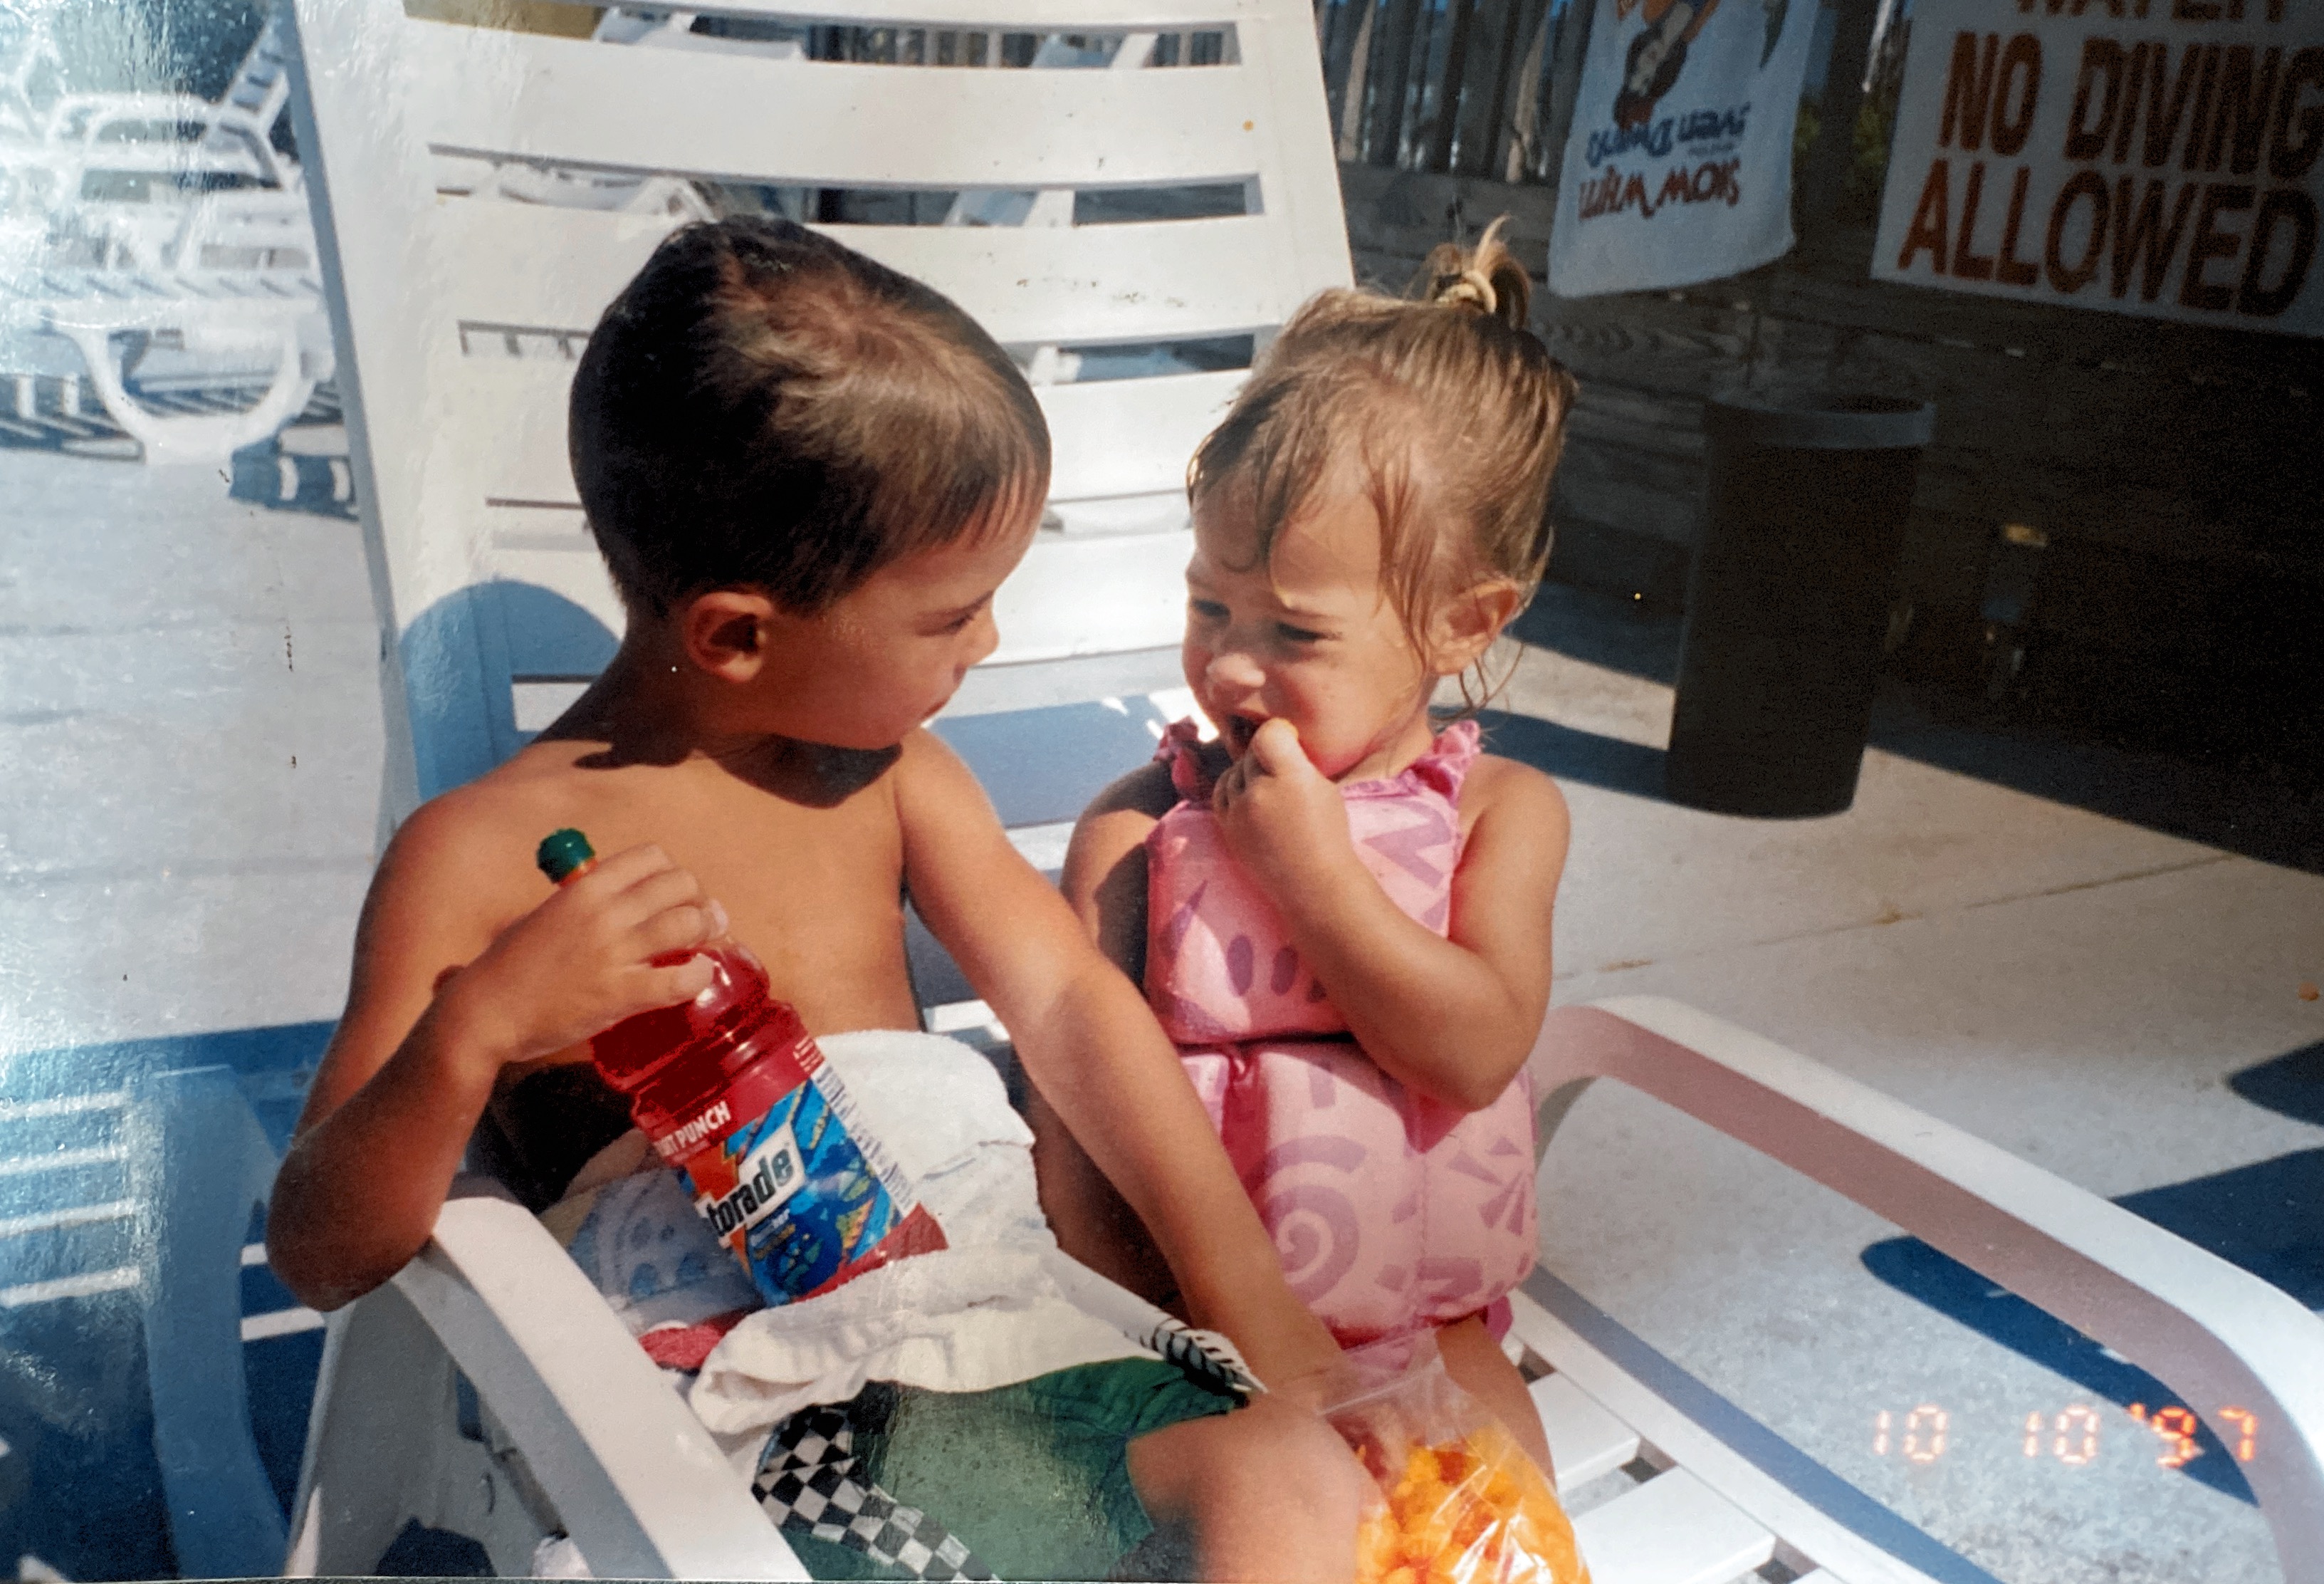 Adam and Bethany sharing snacks at the beach! Surfside Beach, SC 1997